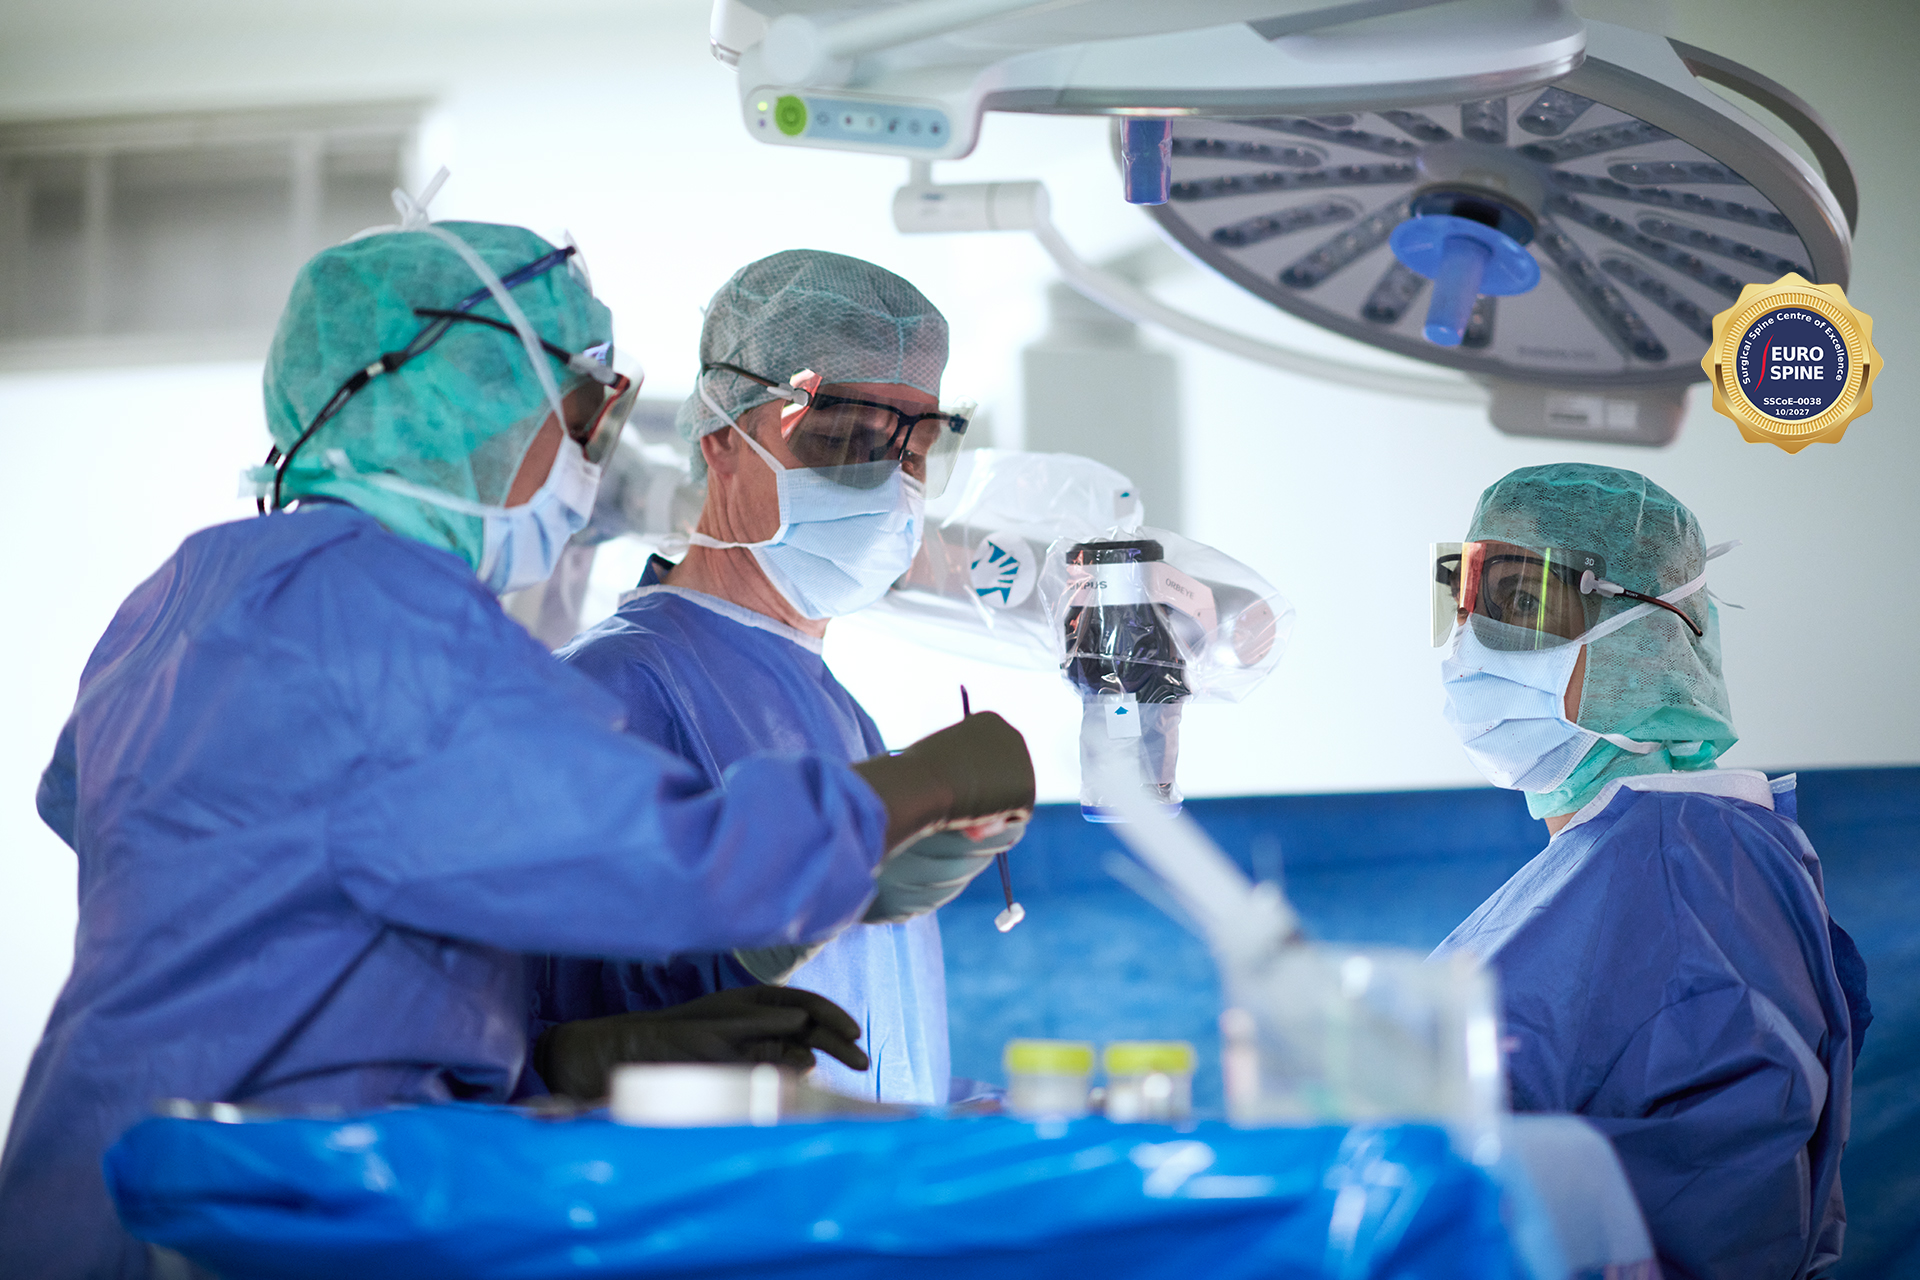 Prof. Stefan Schären and other surgeons during a procedure in the operating room